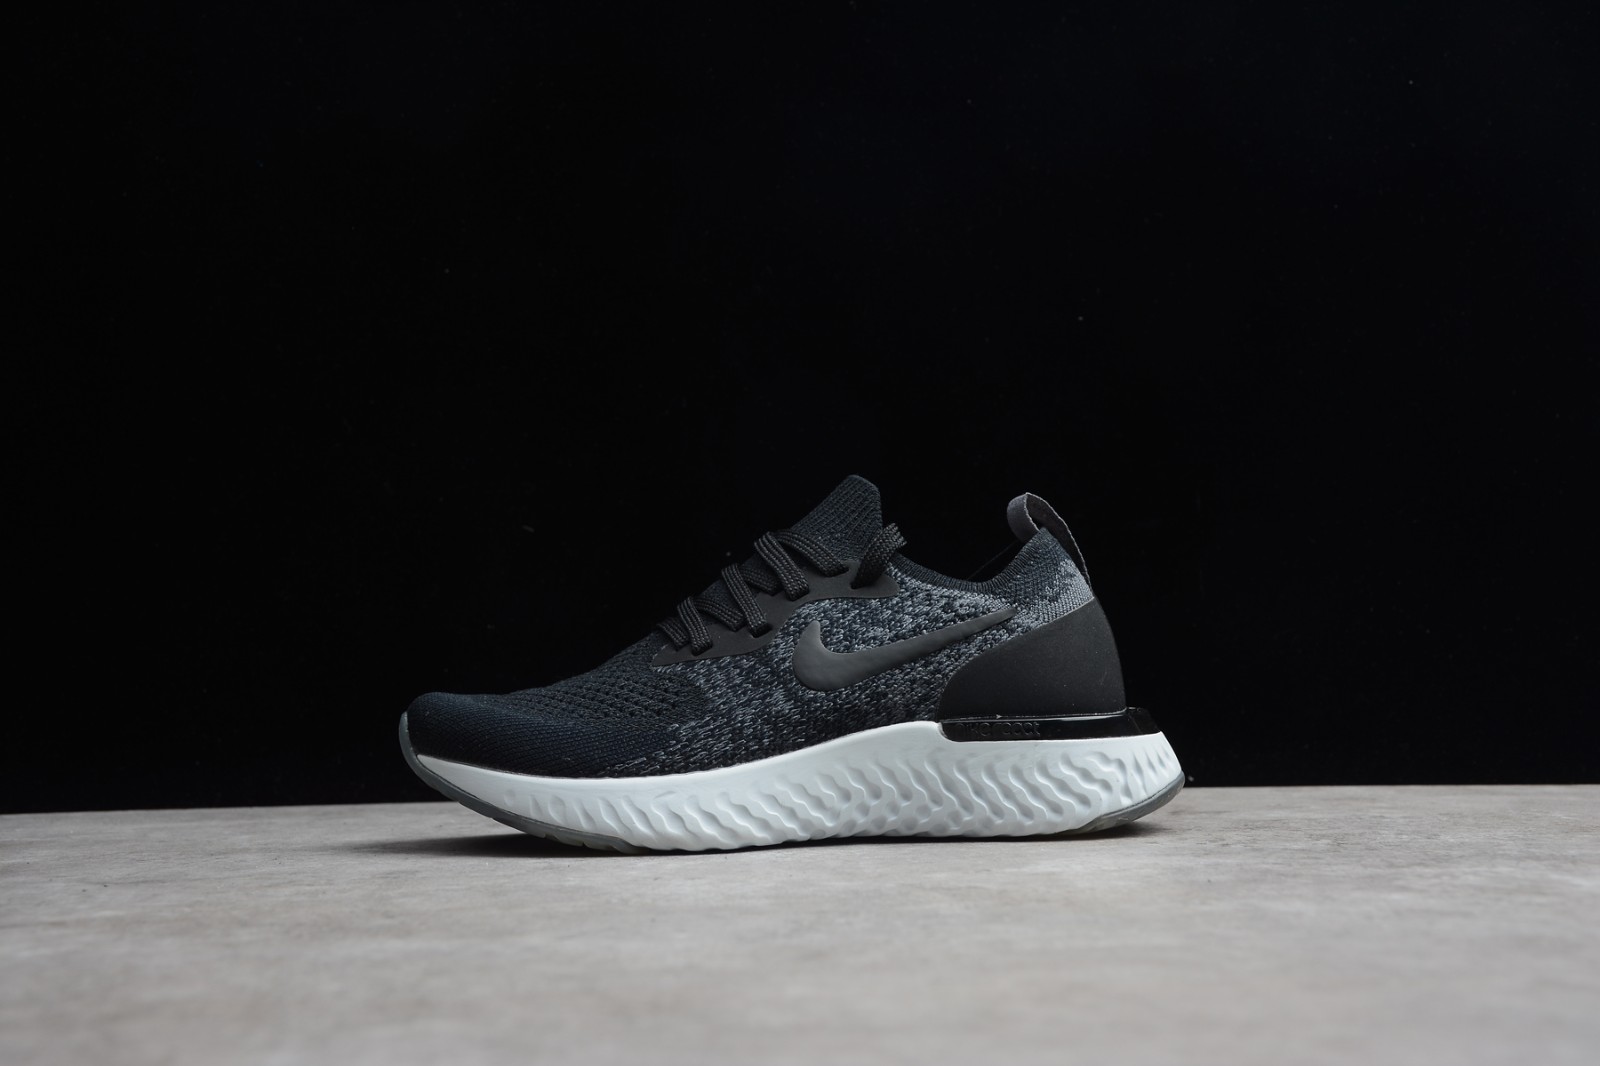 StclaircomoShops Nike Epic React Flyknit Black Anthracite 943311 - 001 - best deal on nike sneakers boys mix and match